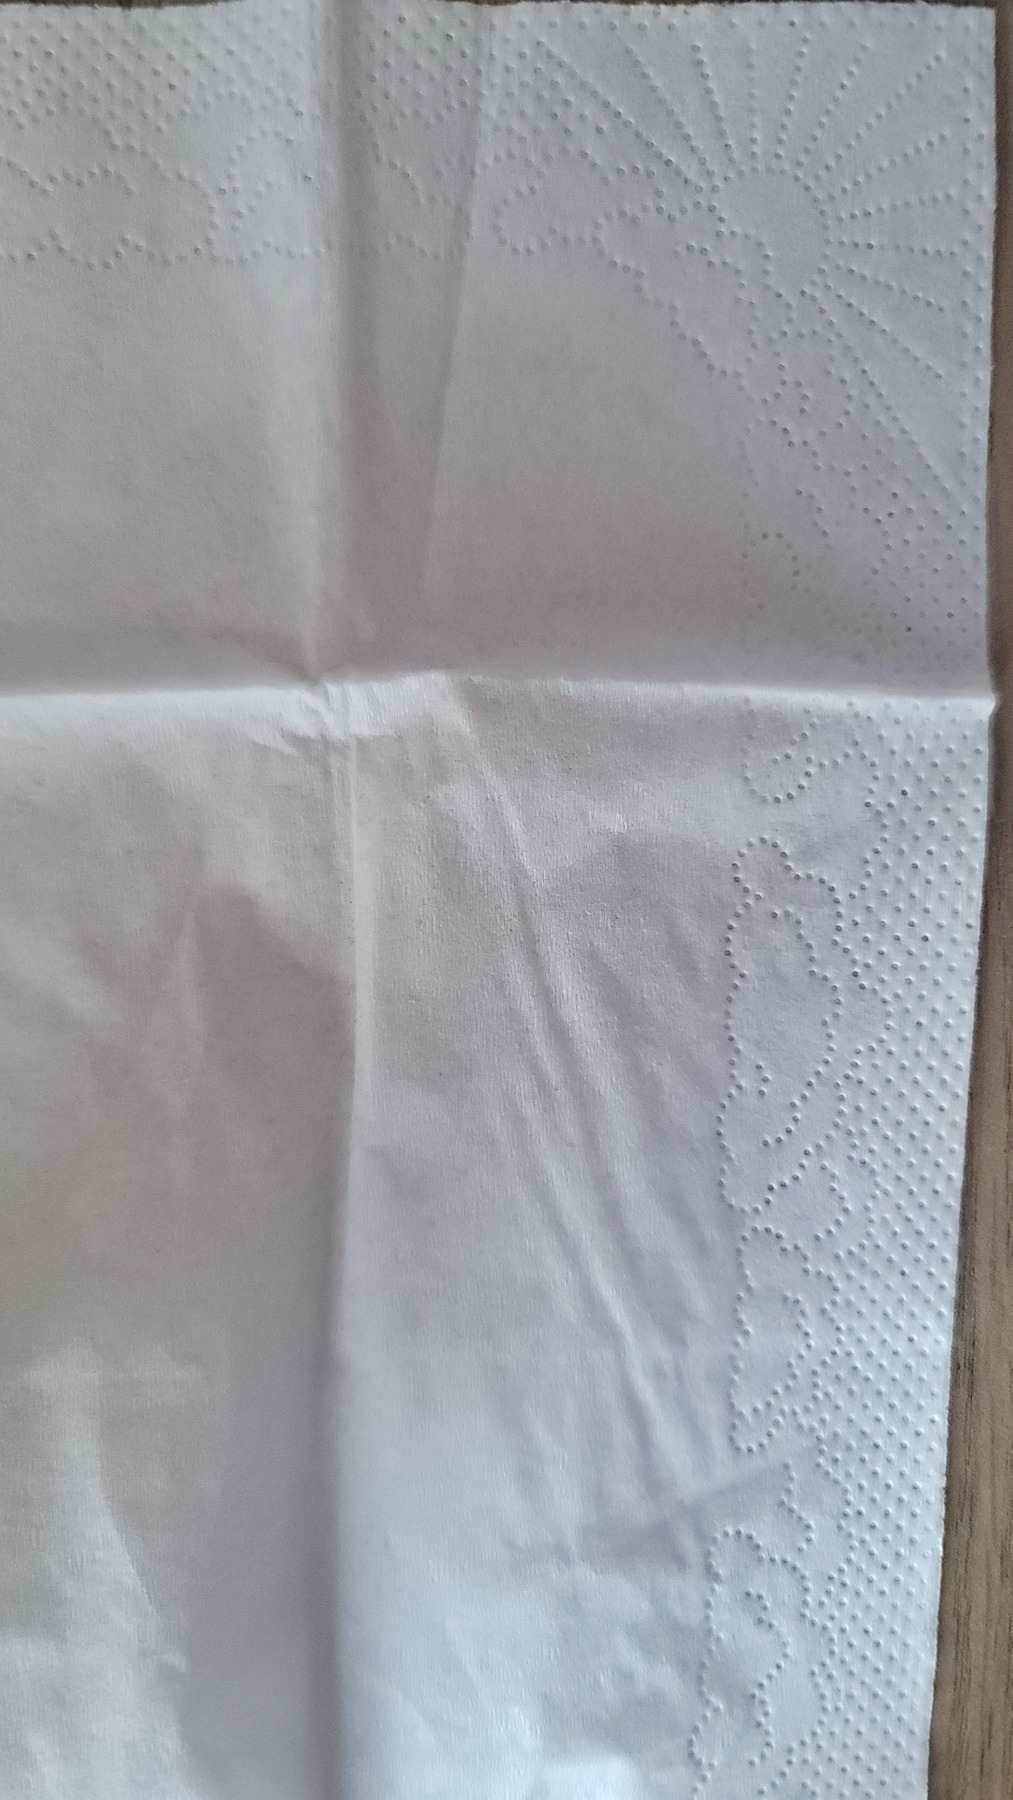 white tissue with a sun made of indented circles in the corner and the same kind of clouds along a border